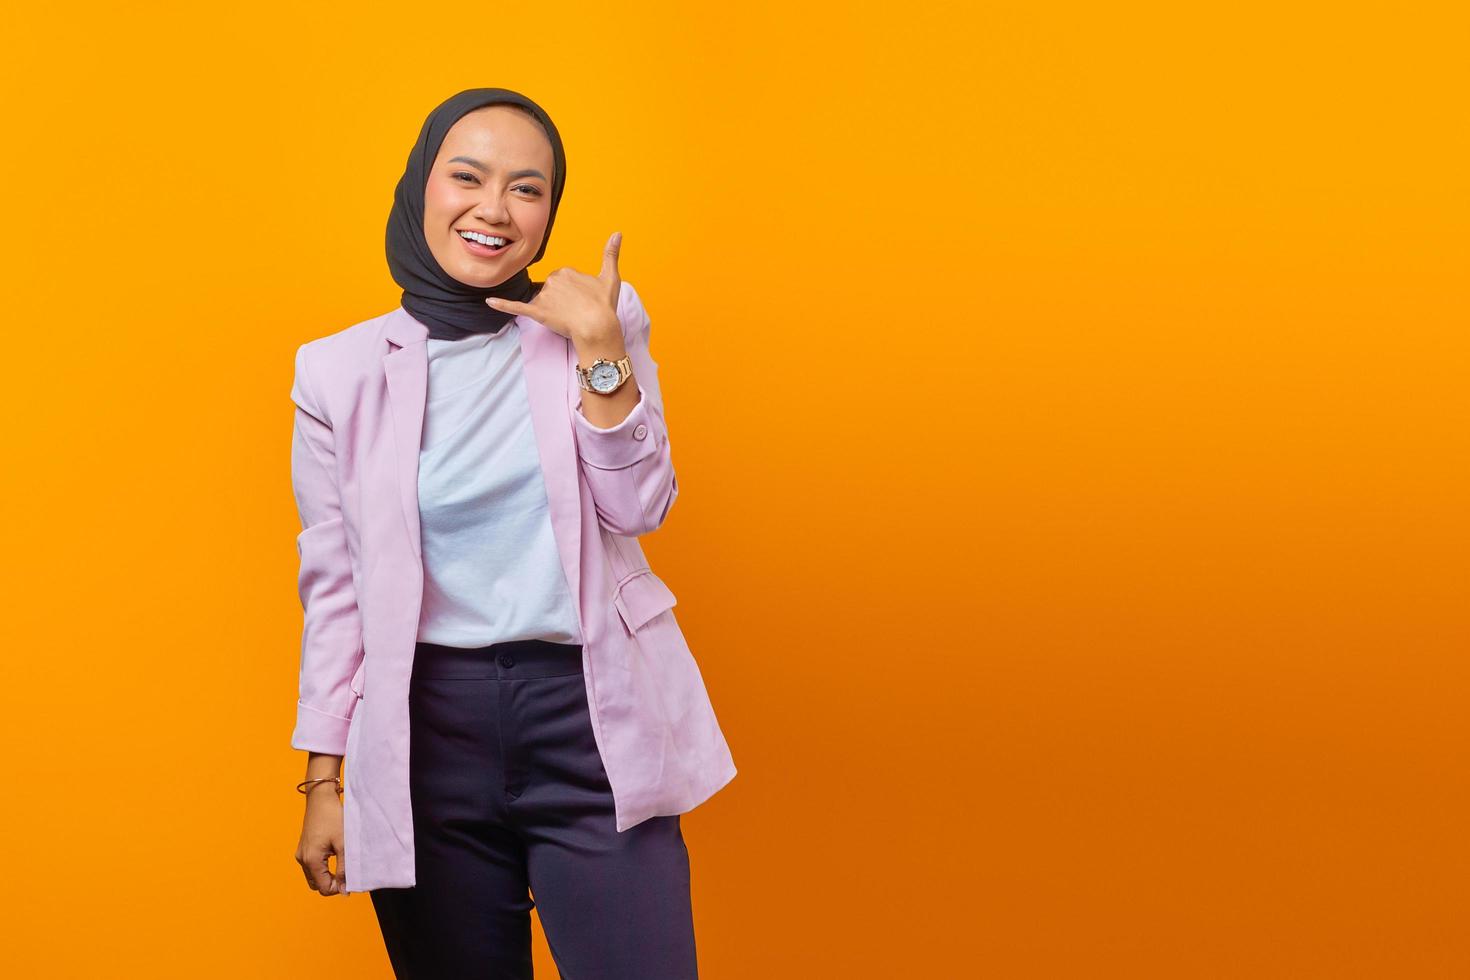 Beautiful Asian woman smiling doing call gesture with hand photo